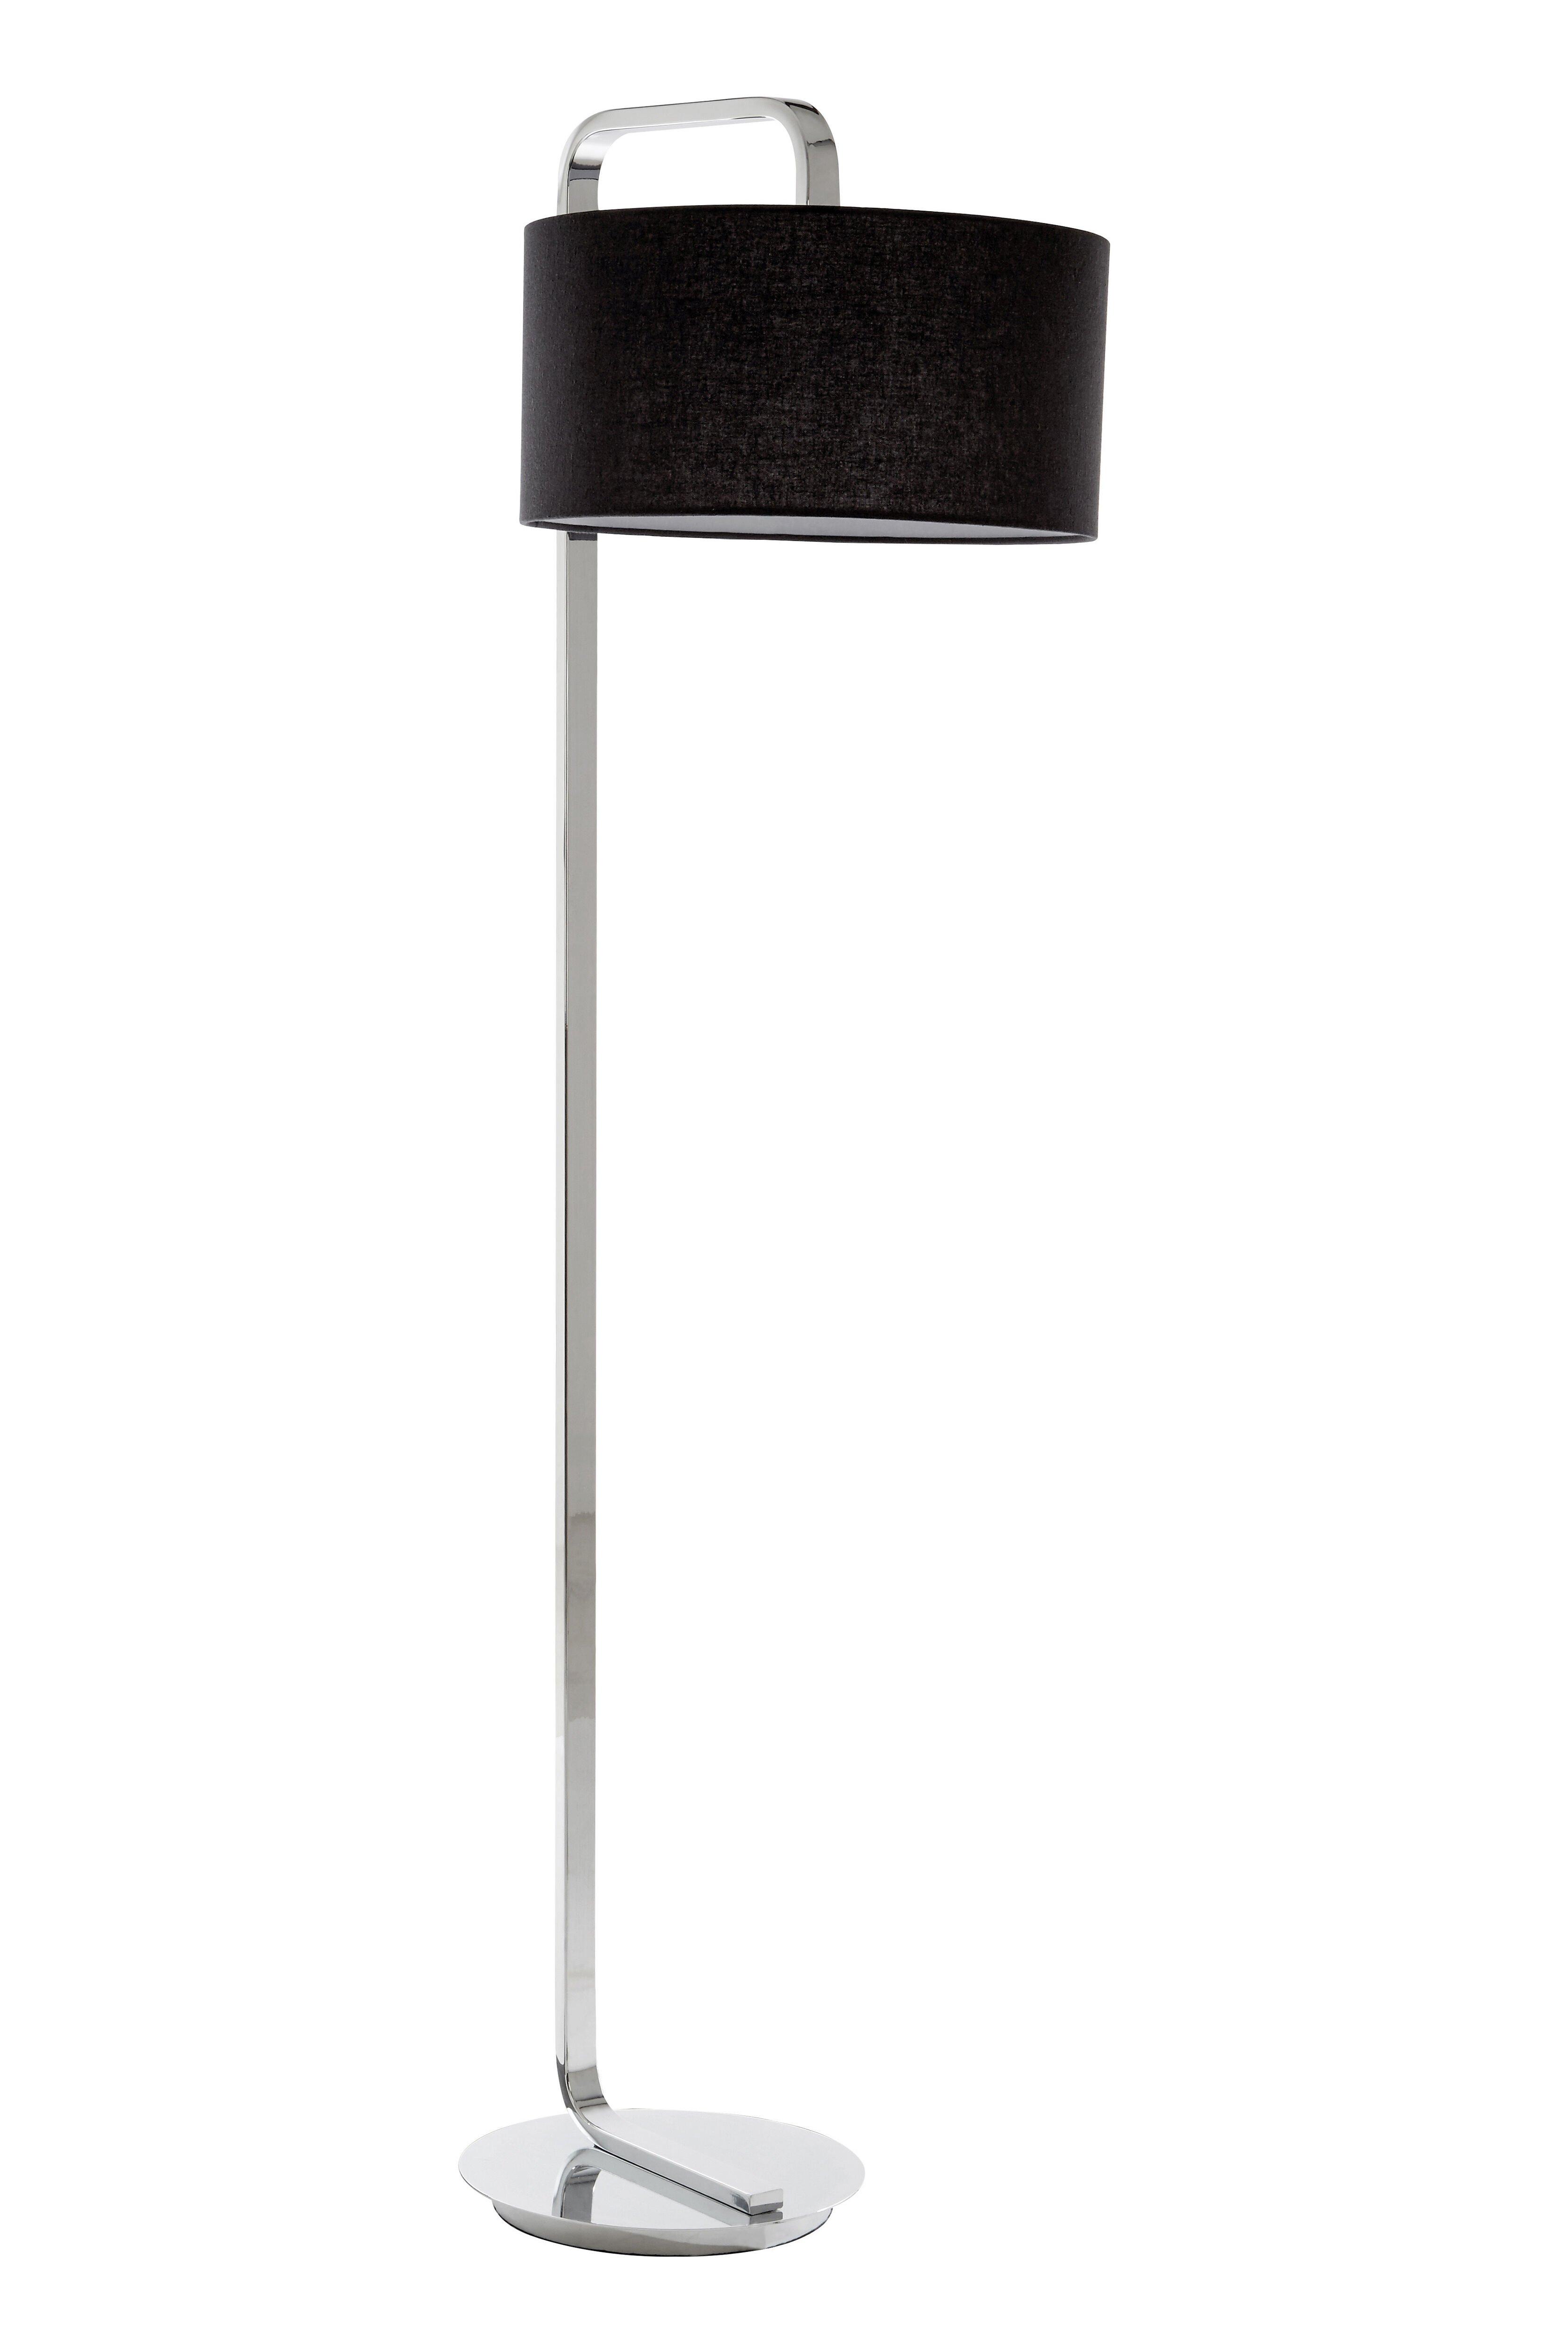 Interiors by Premier Leyna Floor Lamp with Black Fabric Shade